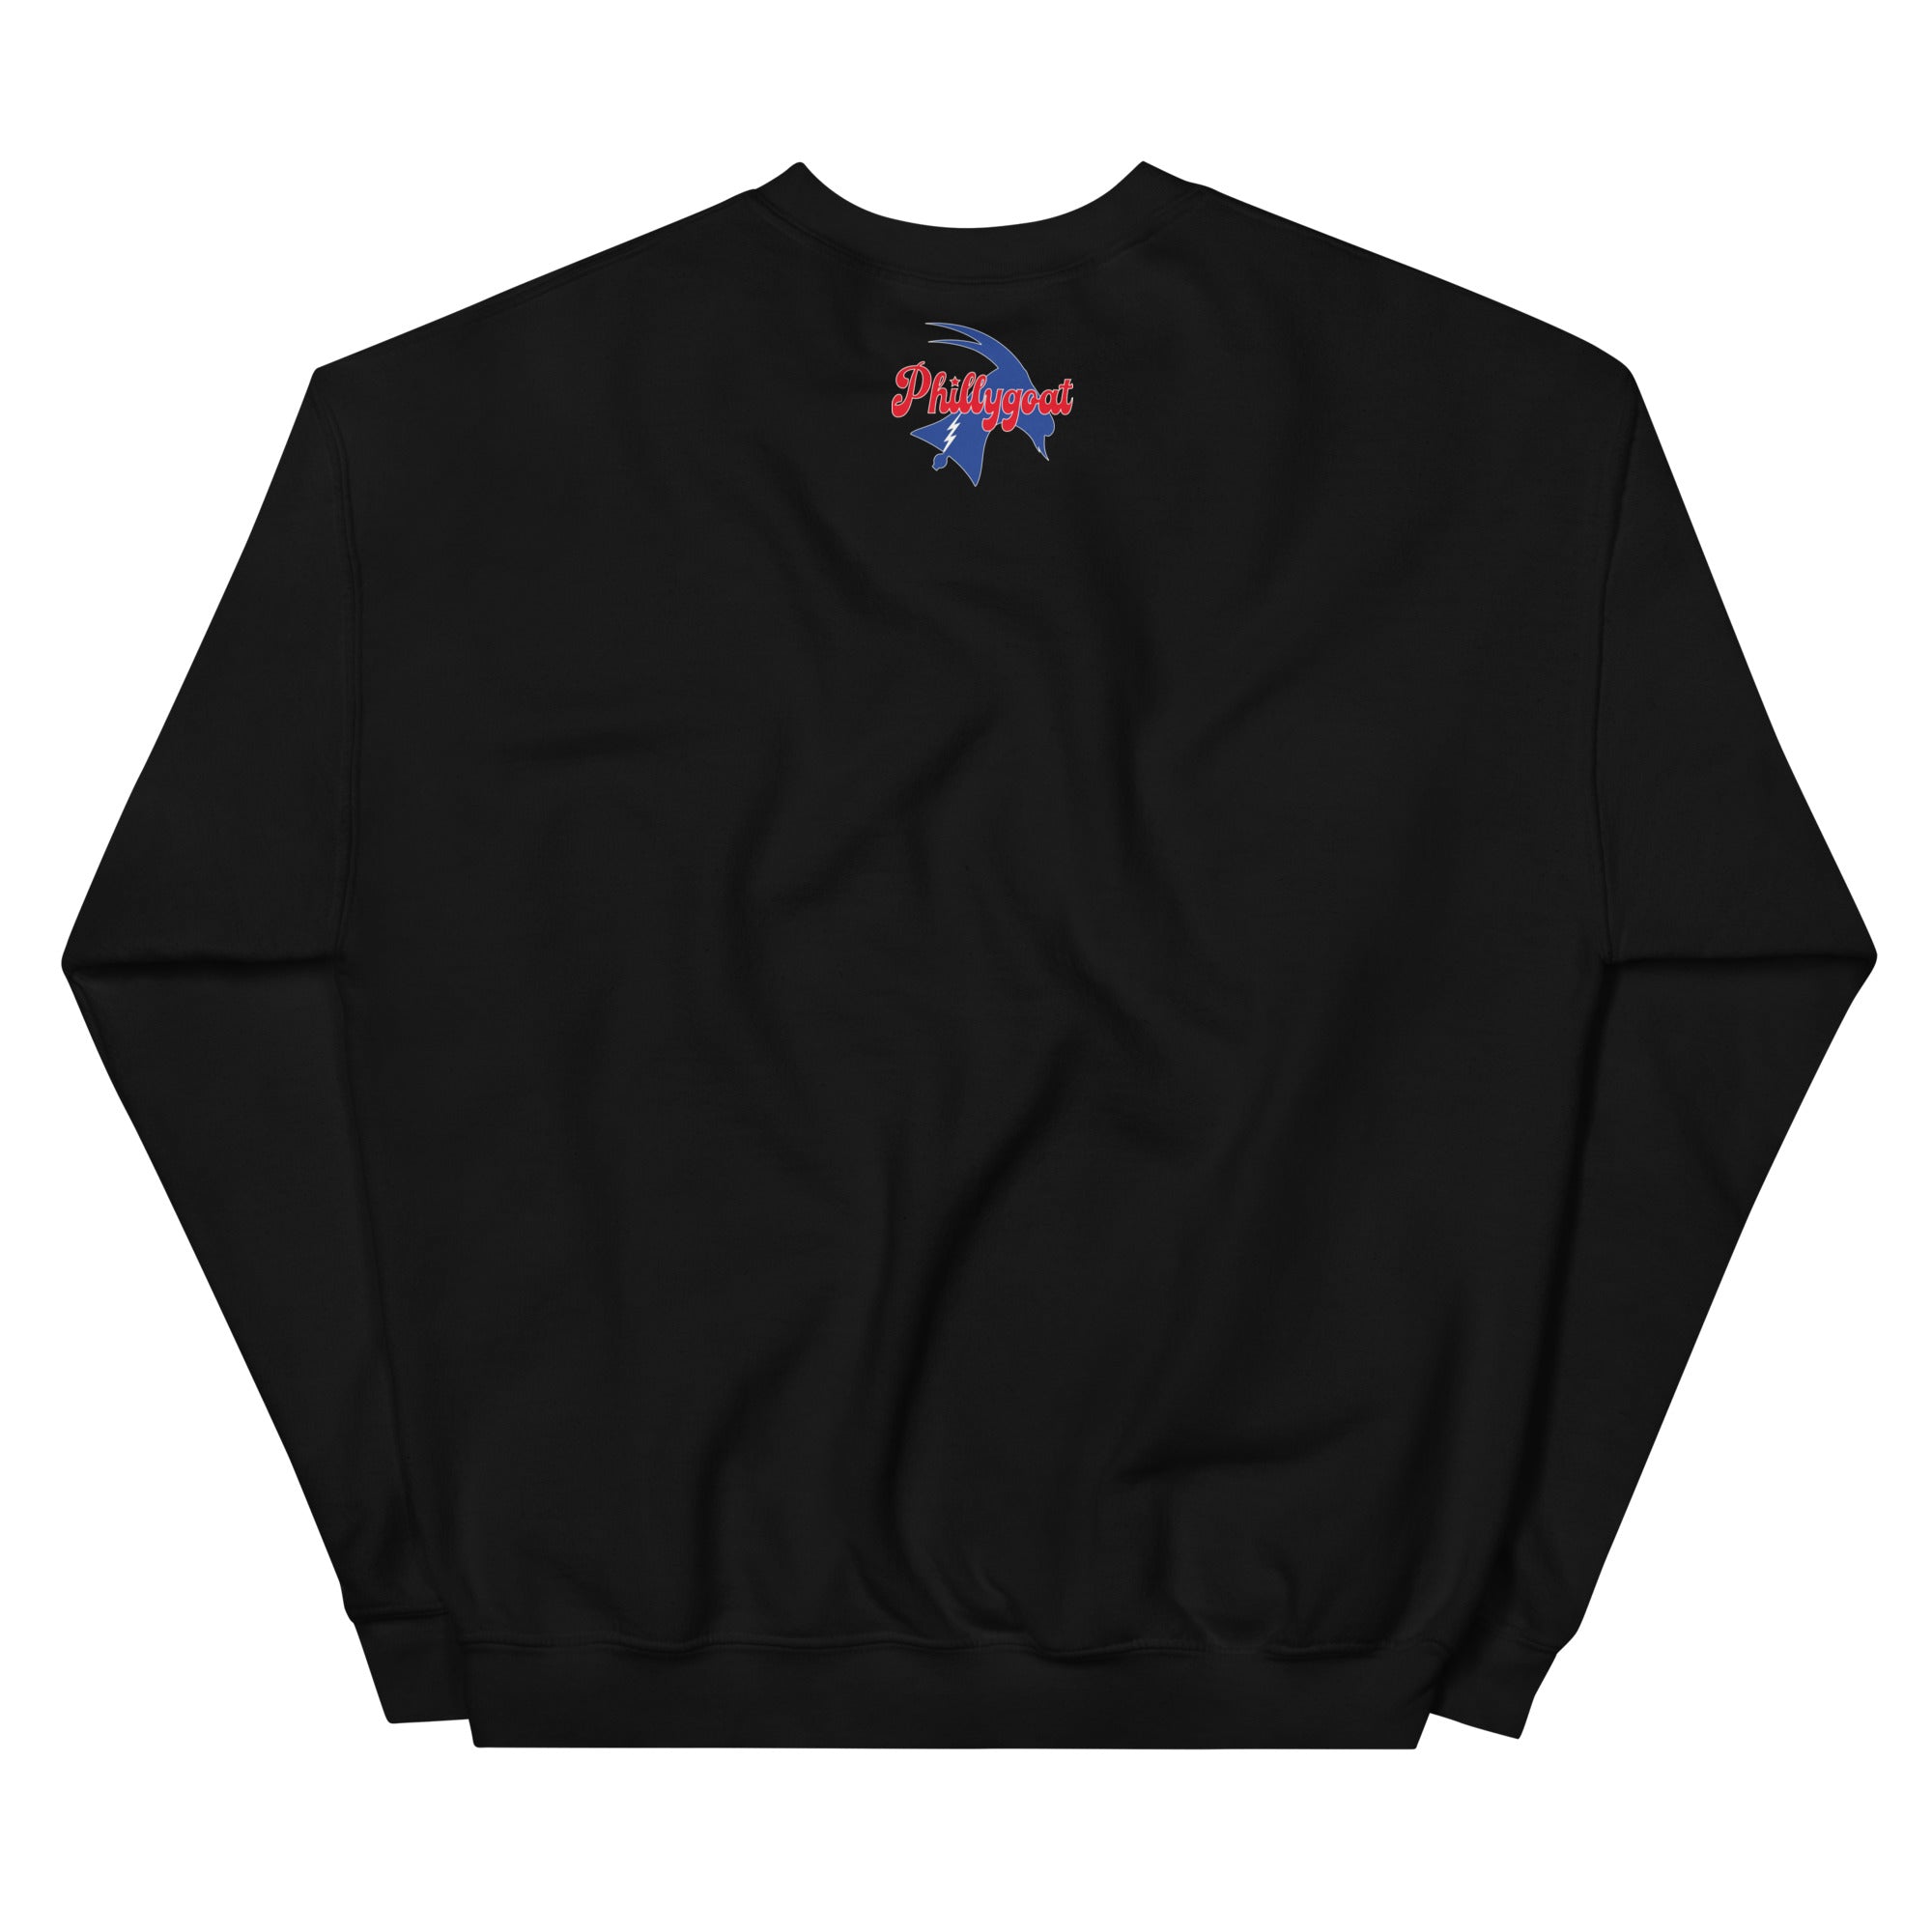 "Made in Philly" Sweatshirt